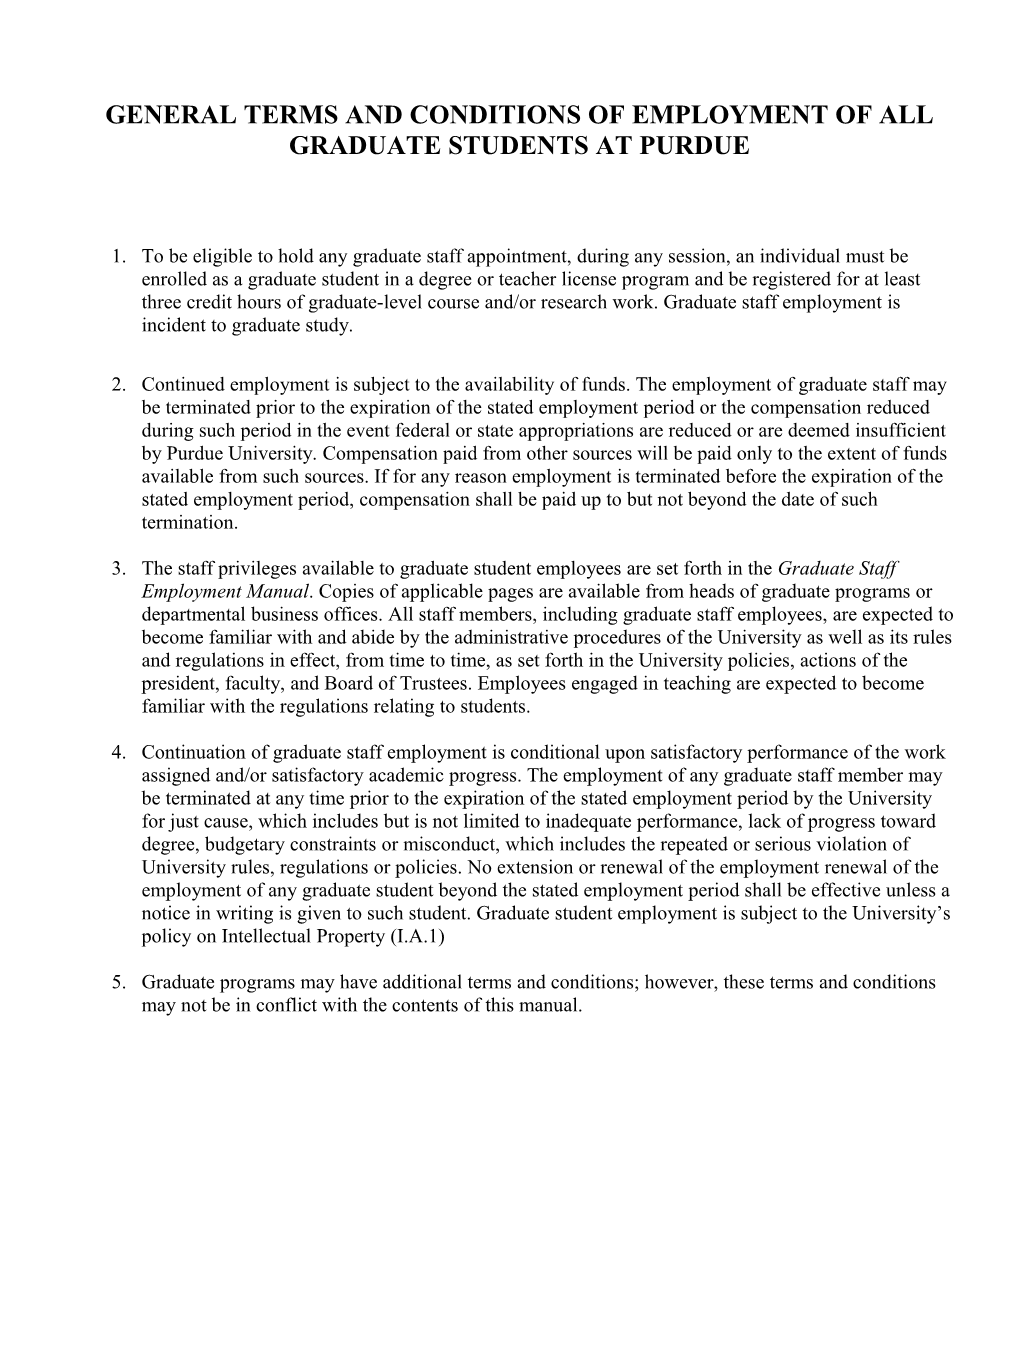 General Terms and Conditions of Employment of All Graduate Students at Purdue